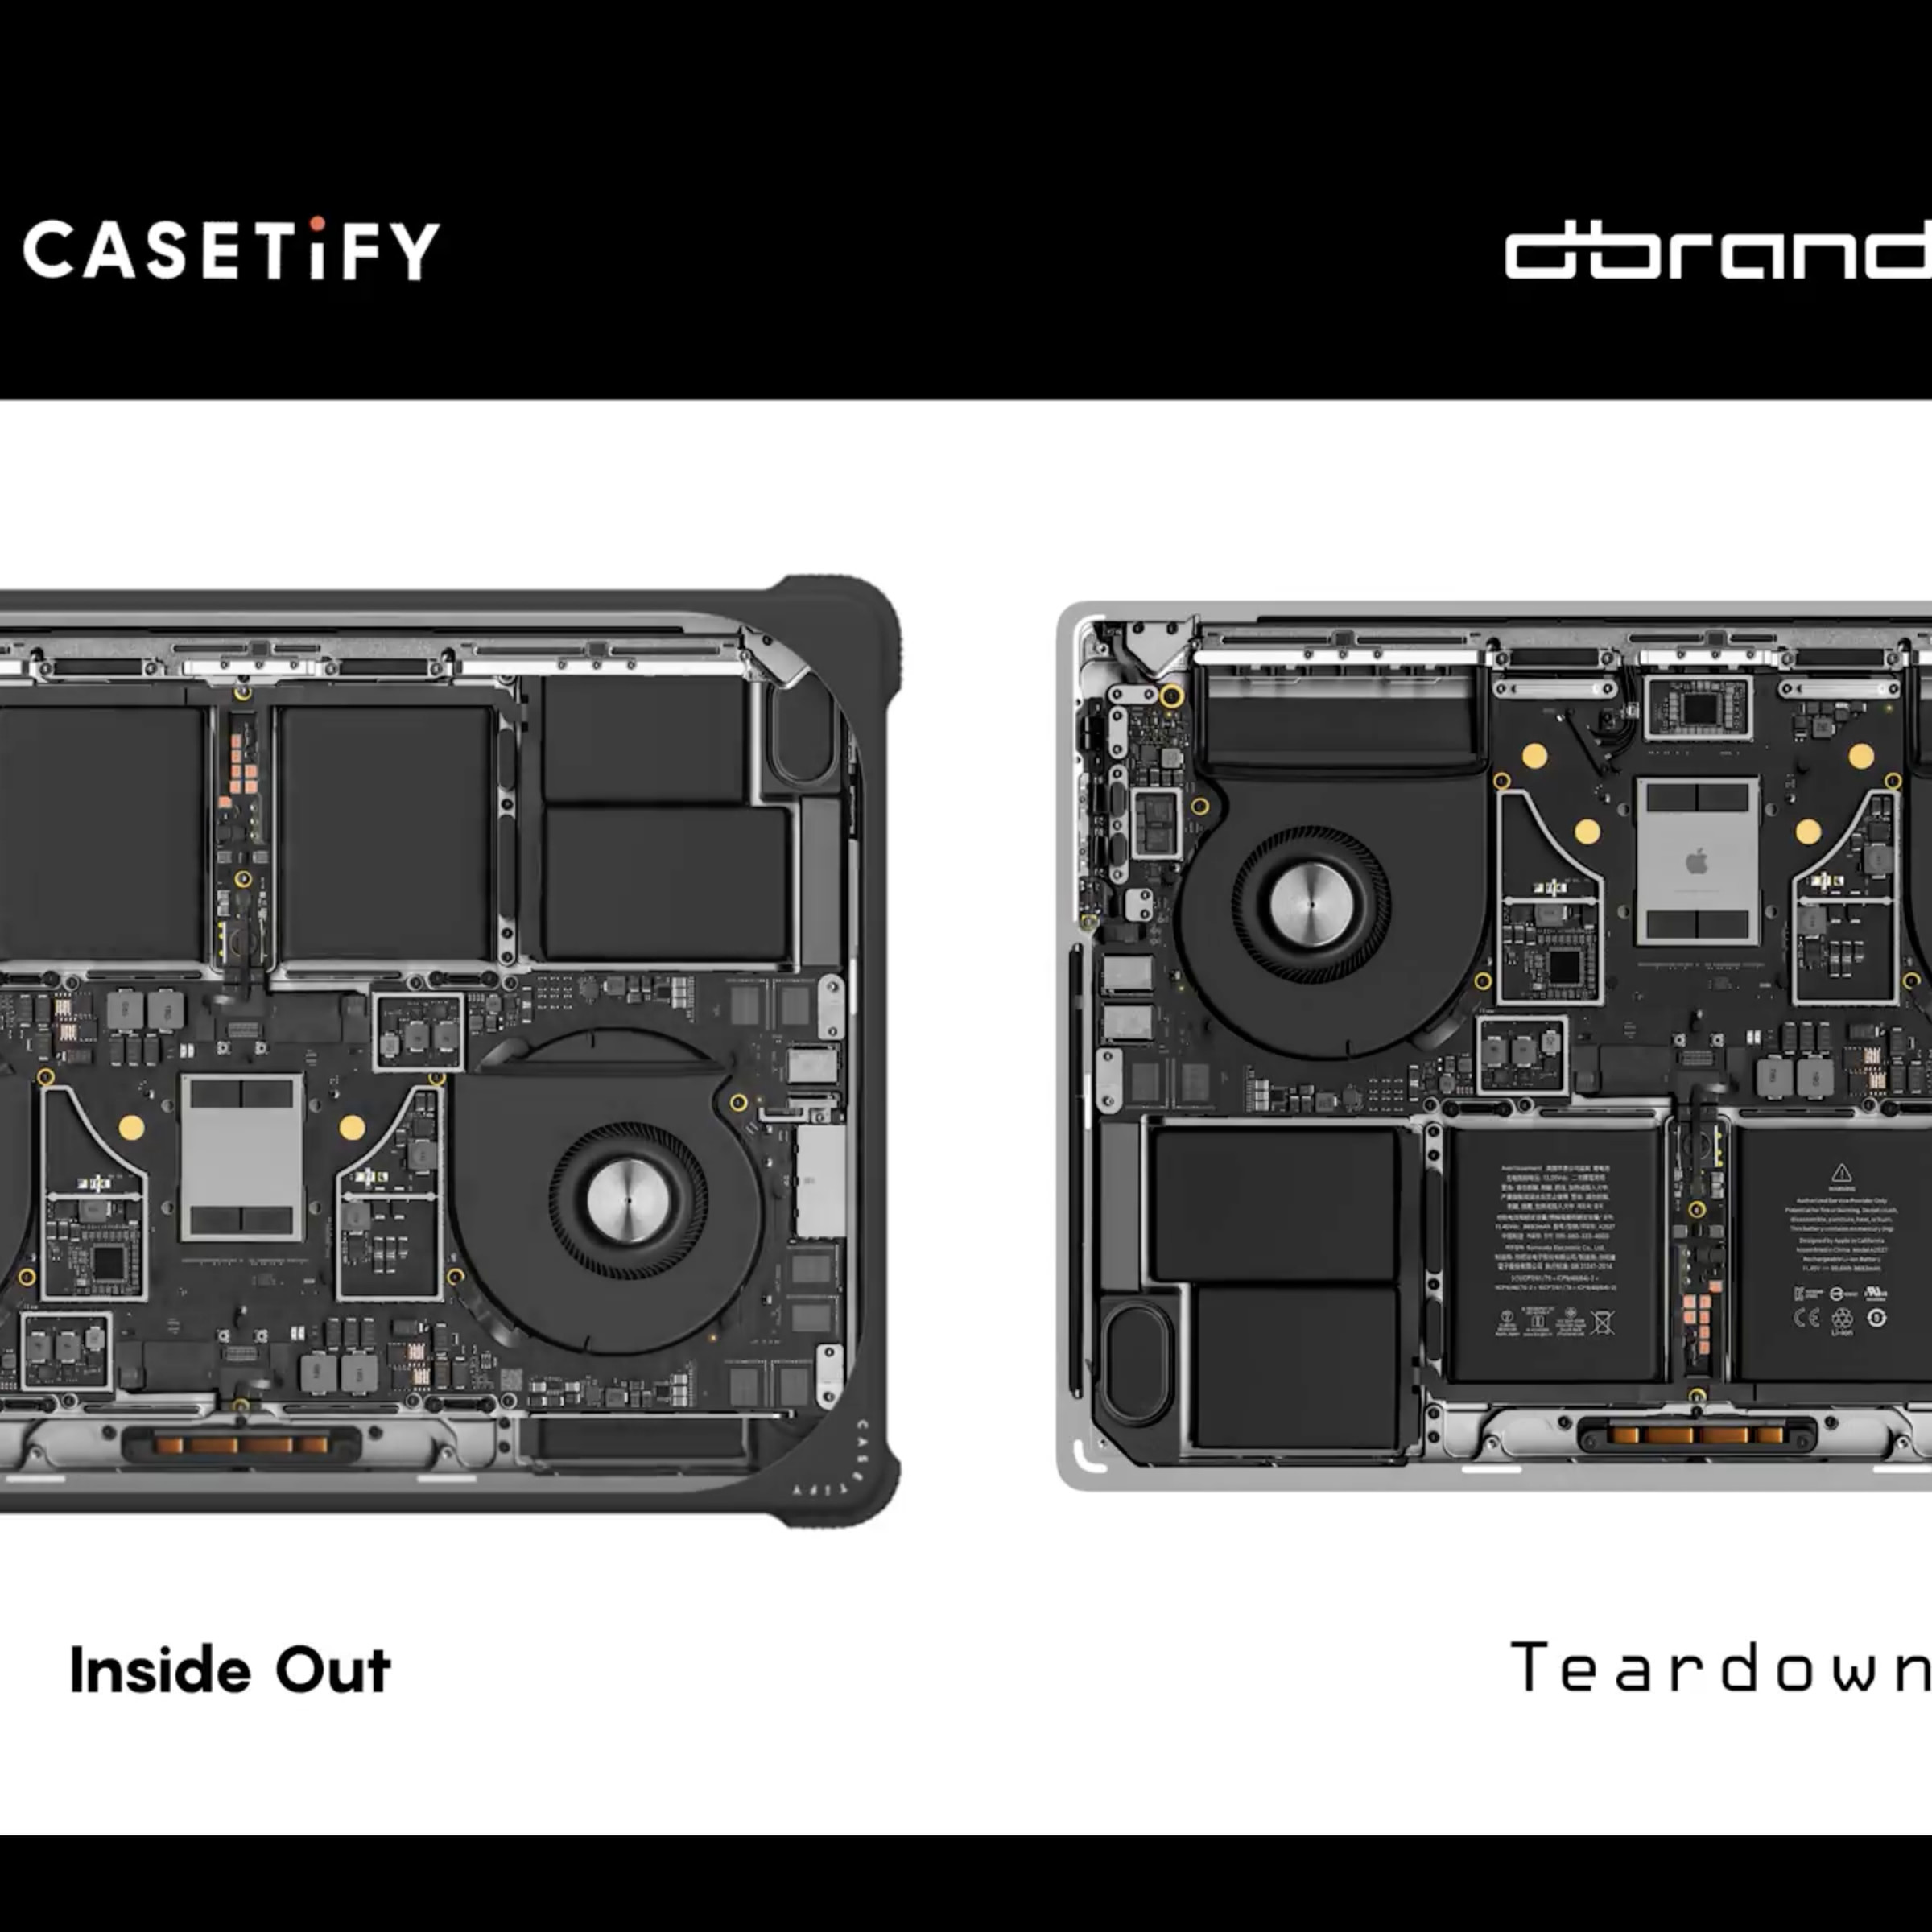 An image comparing Dbrand’s Teardown designs to Casetify’s Inside Out products.